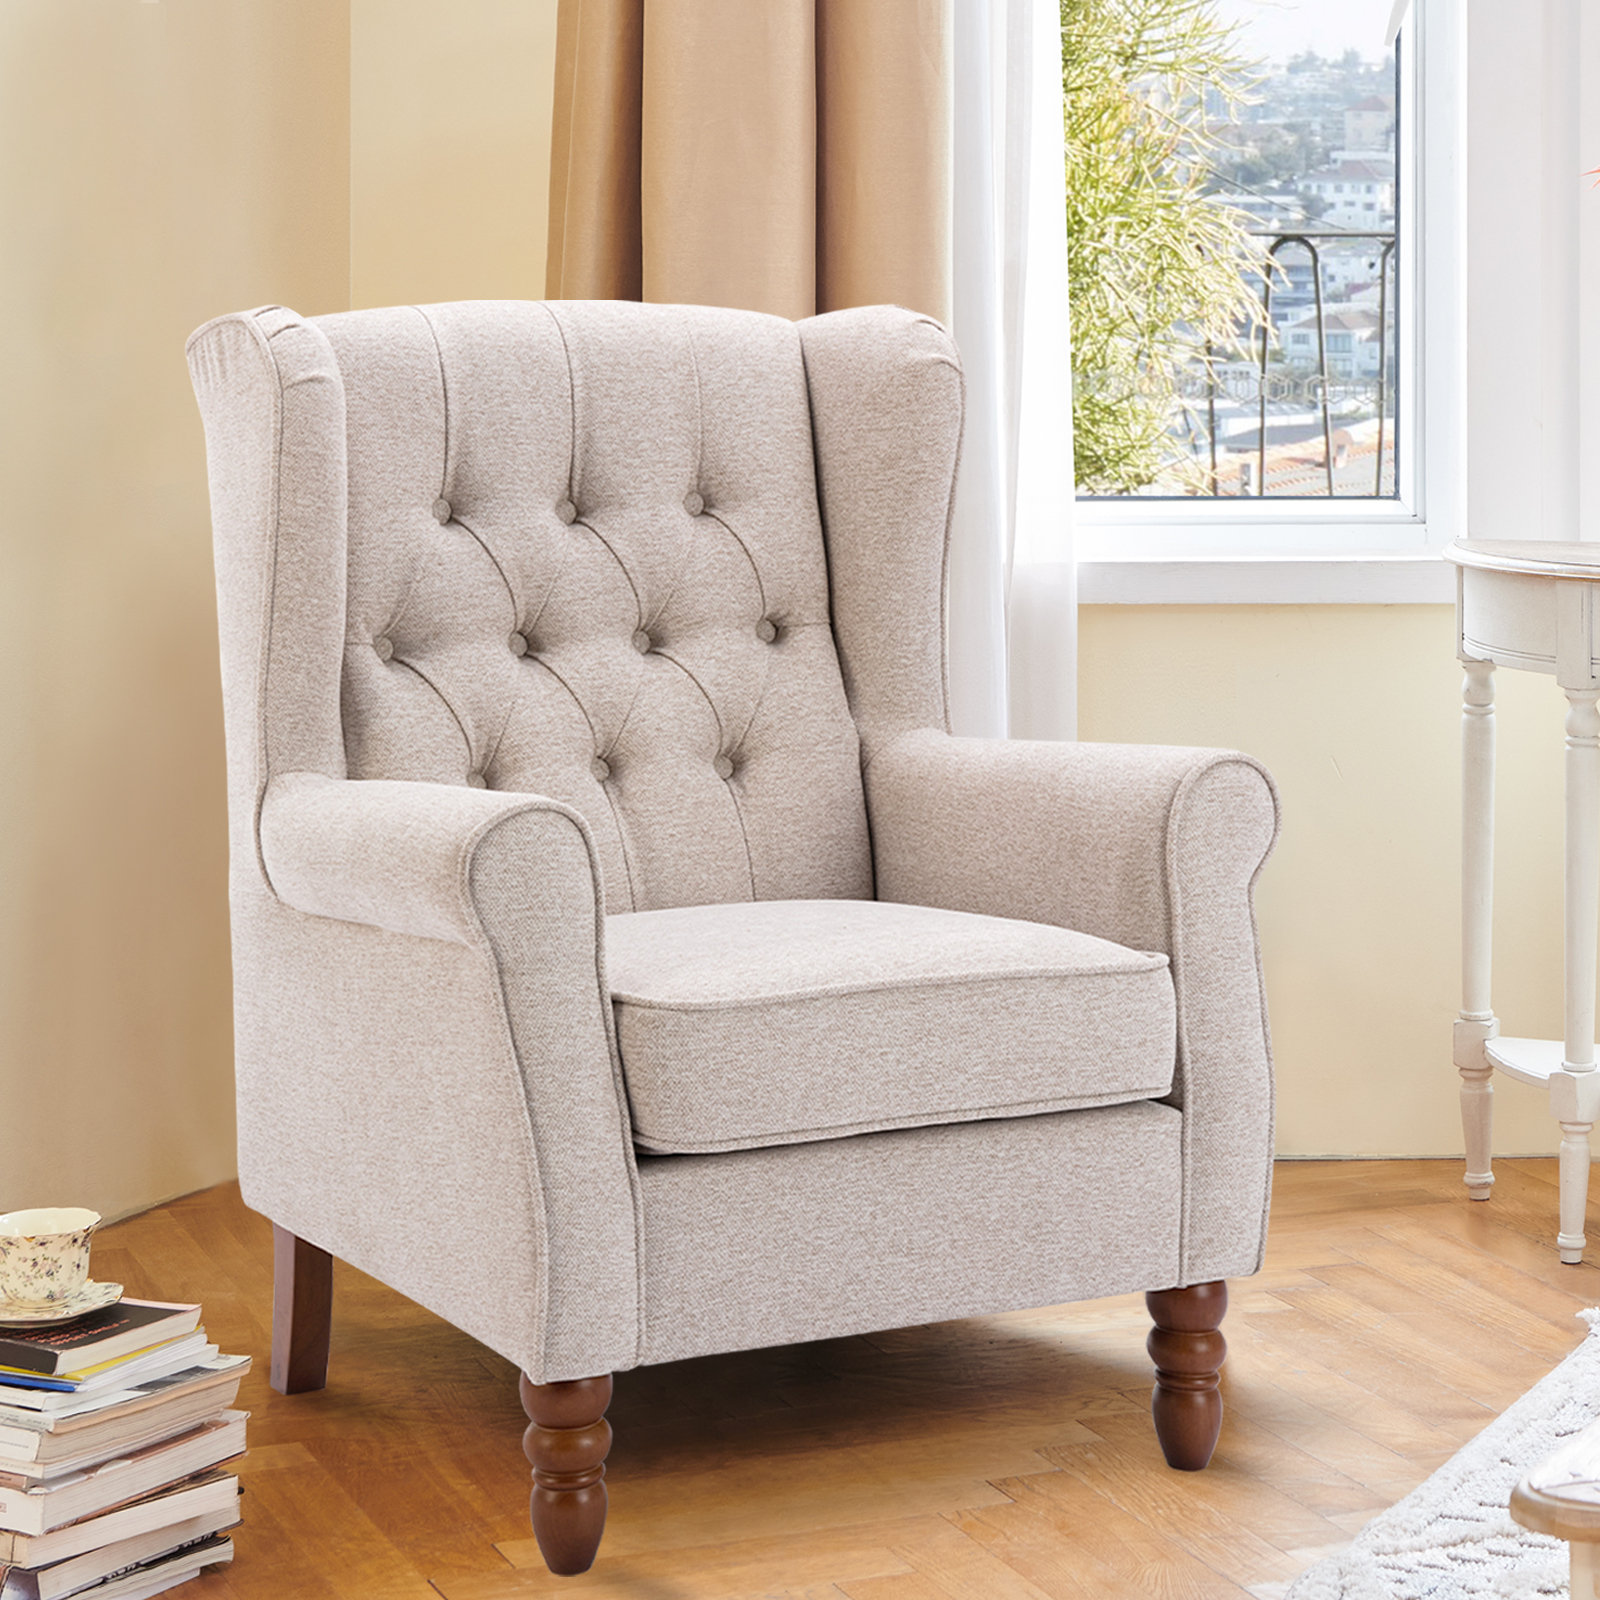 Mercer41 Button-Tufted Small Wingback Accent Chair with Rolled Arm